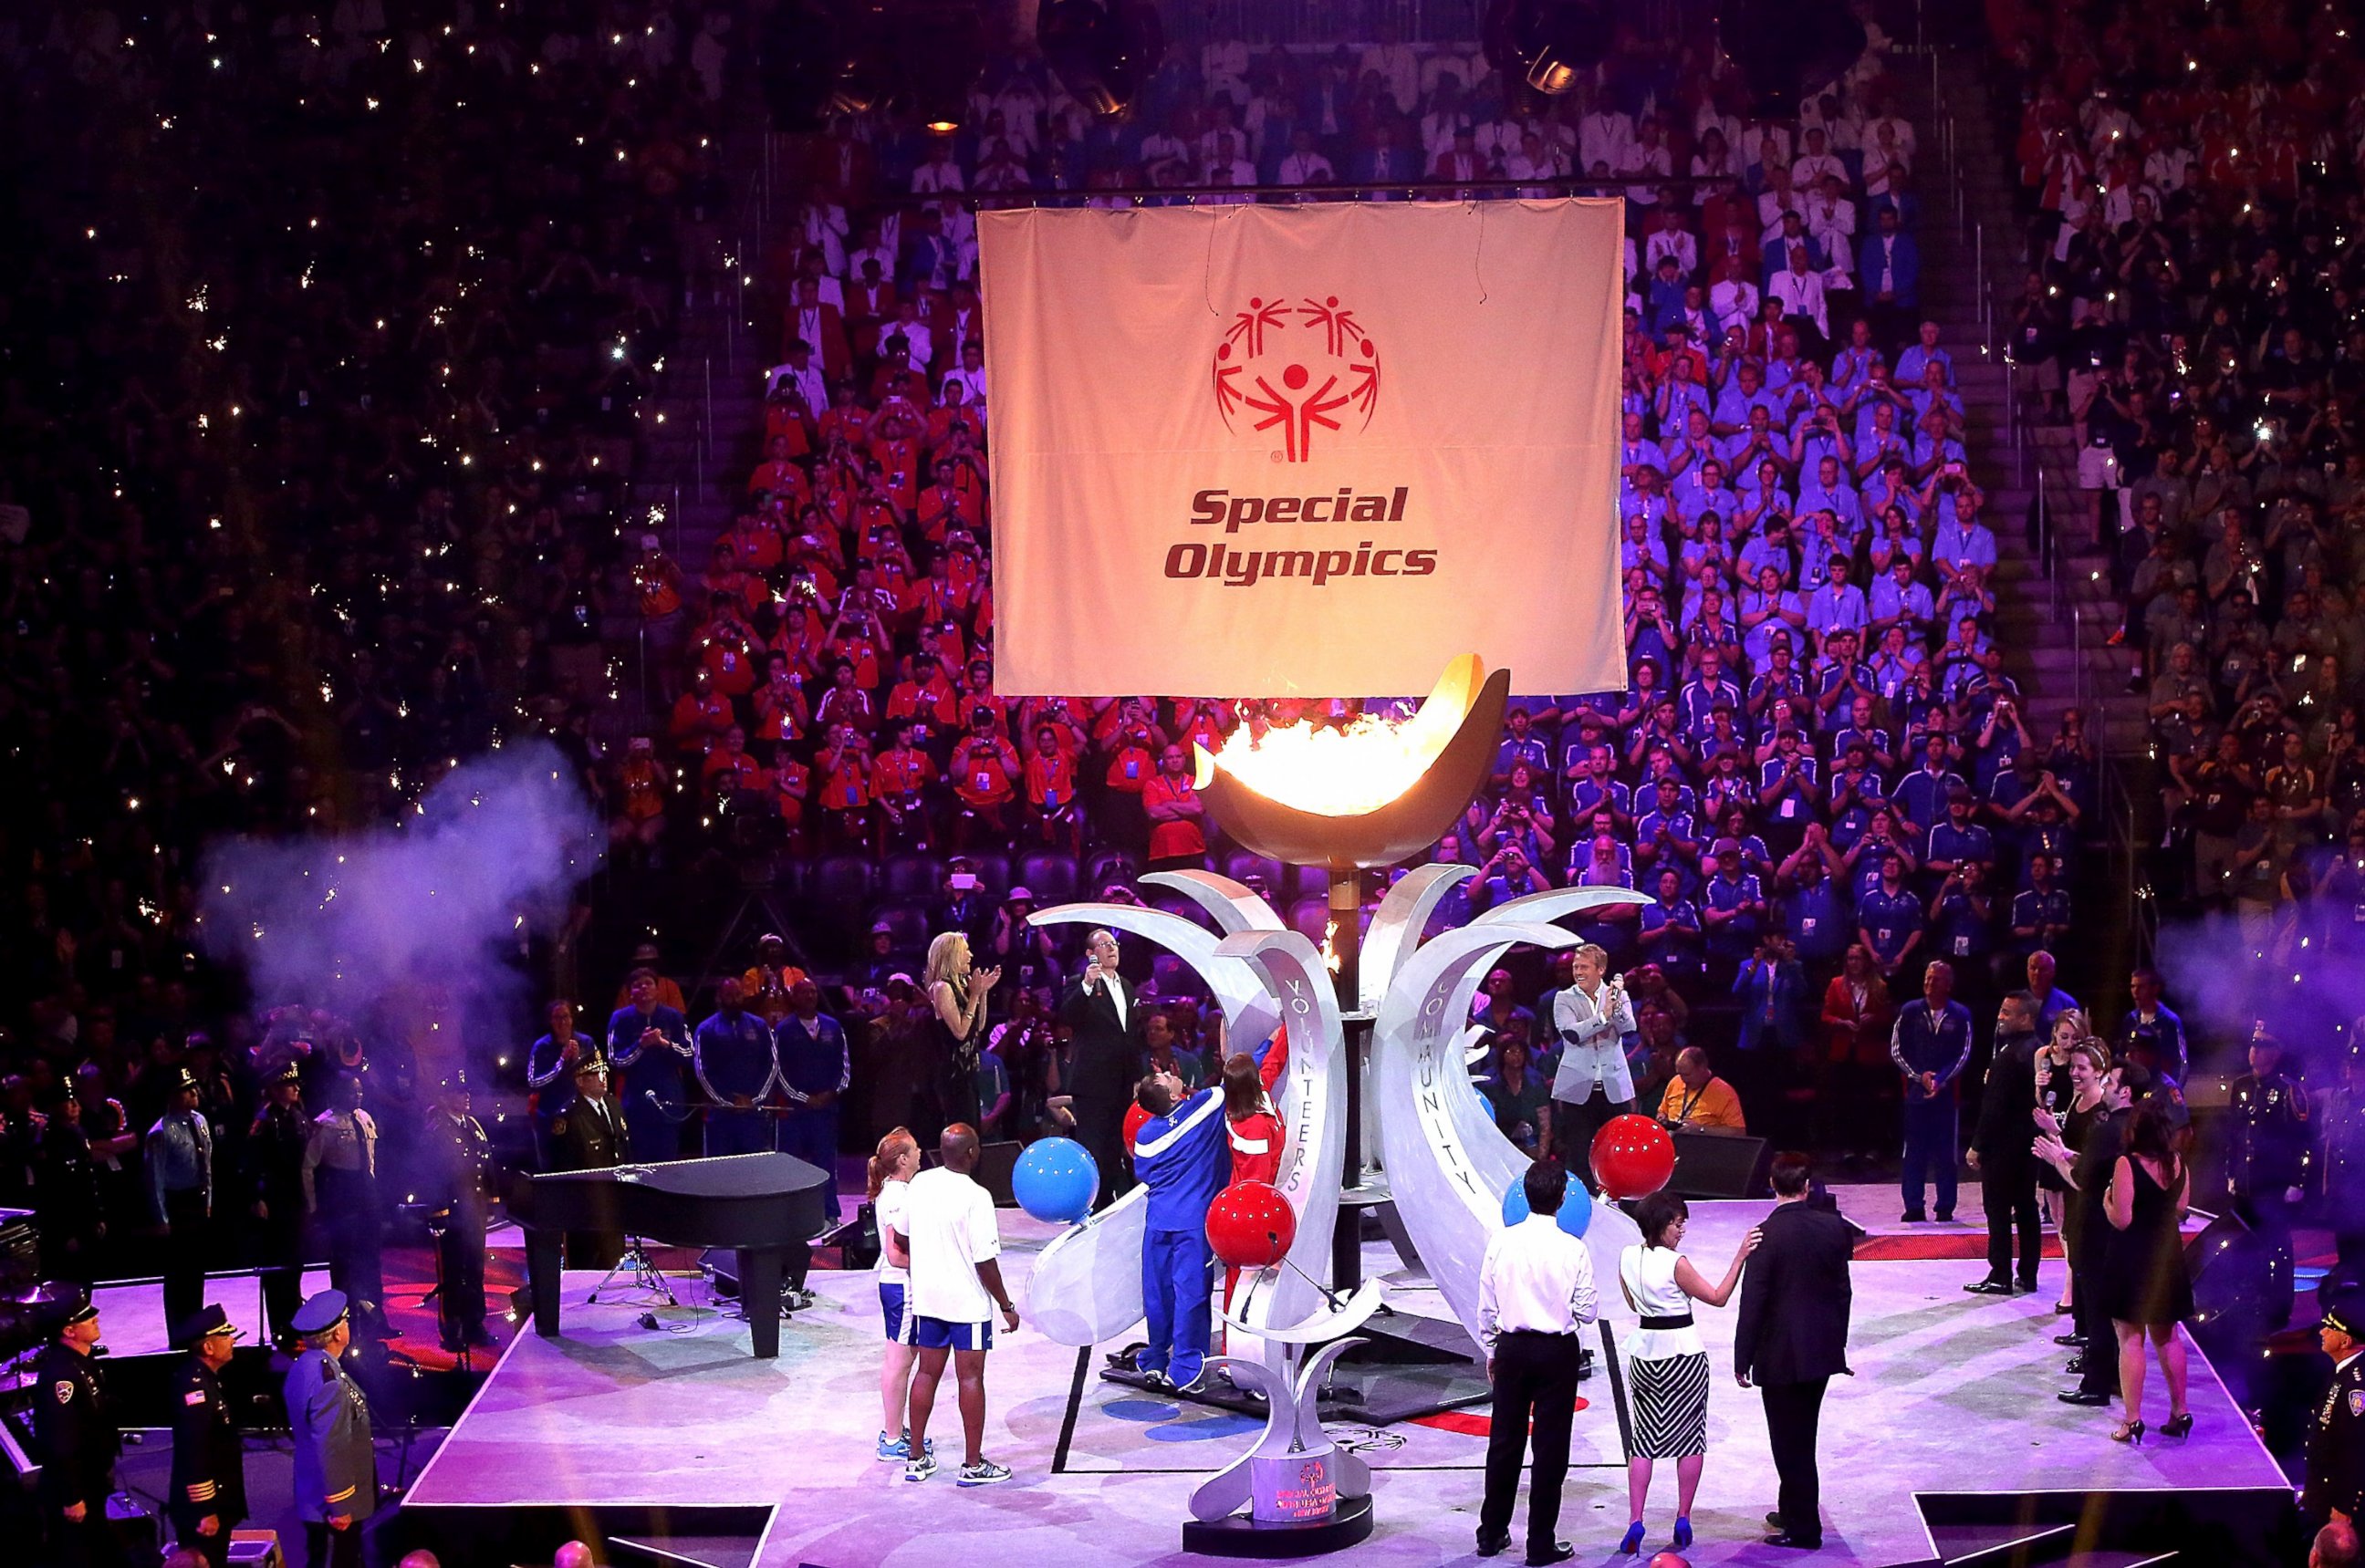 PHOTO: Prudential Center Host 2014 Special Olympics USA Games Opening Ceremony at Prudential Center in Newark, N.J., June 15, 2014.  